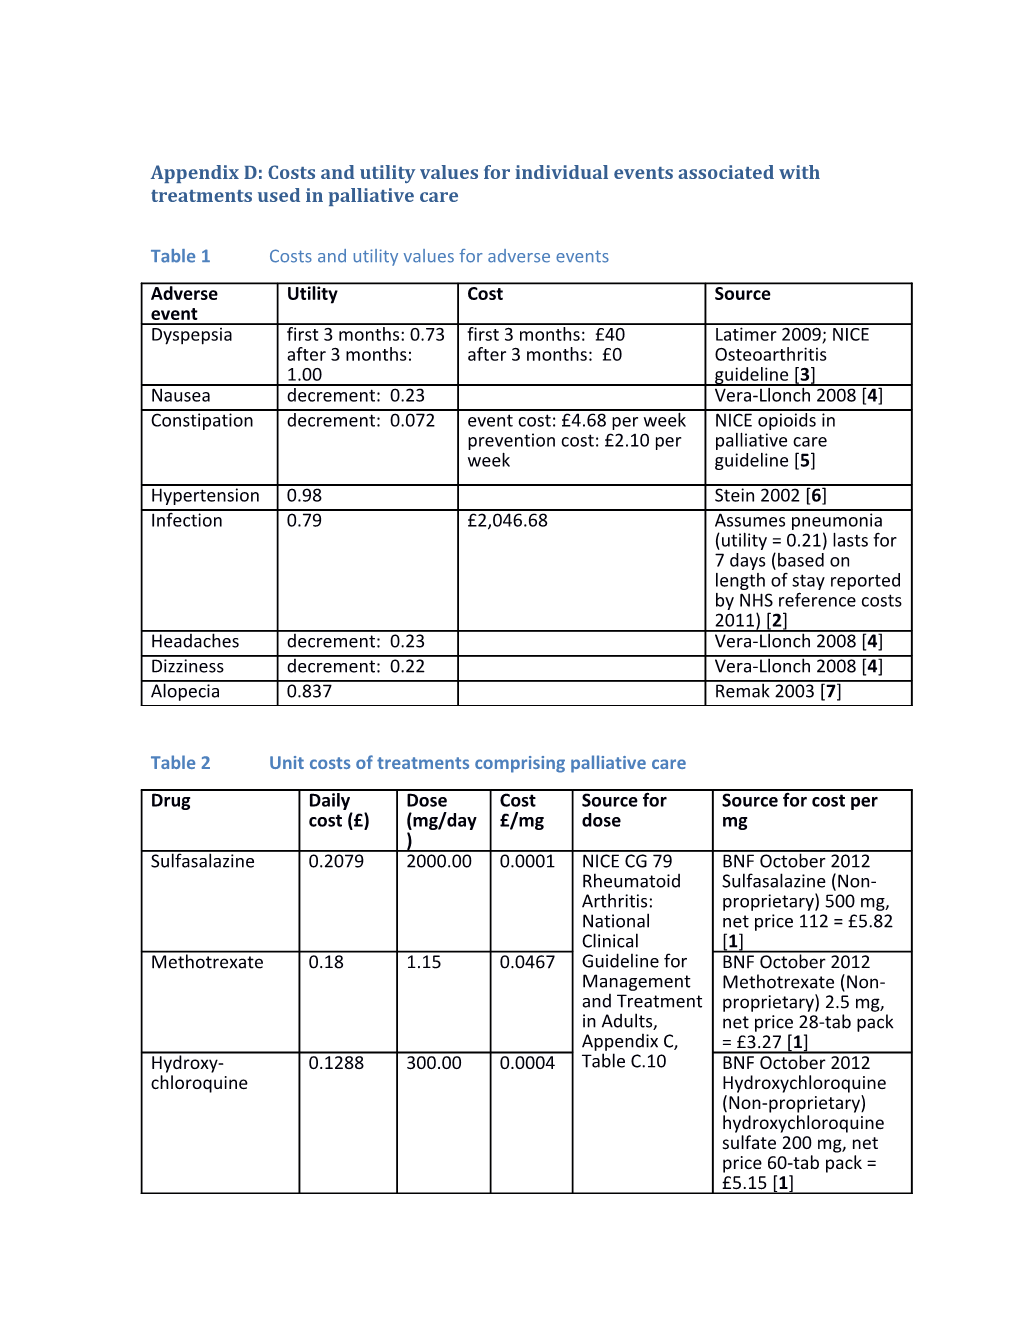 Table 1Costs and Utility Values for Adverse Events